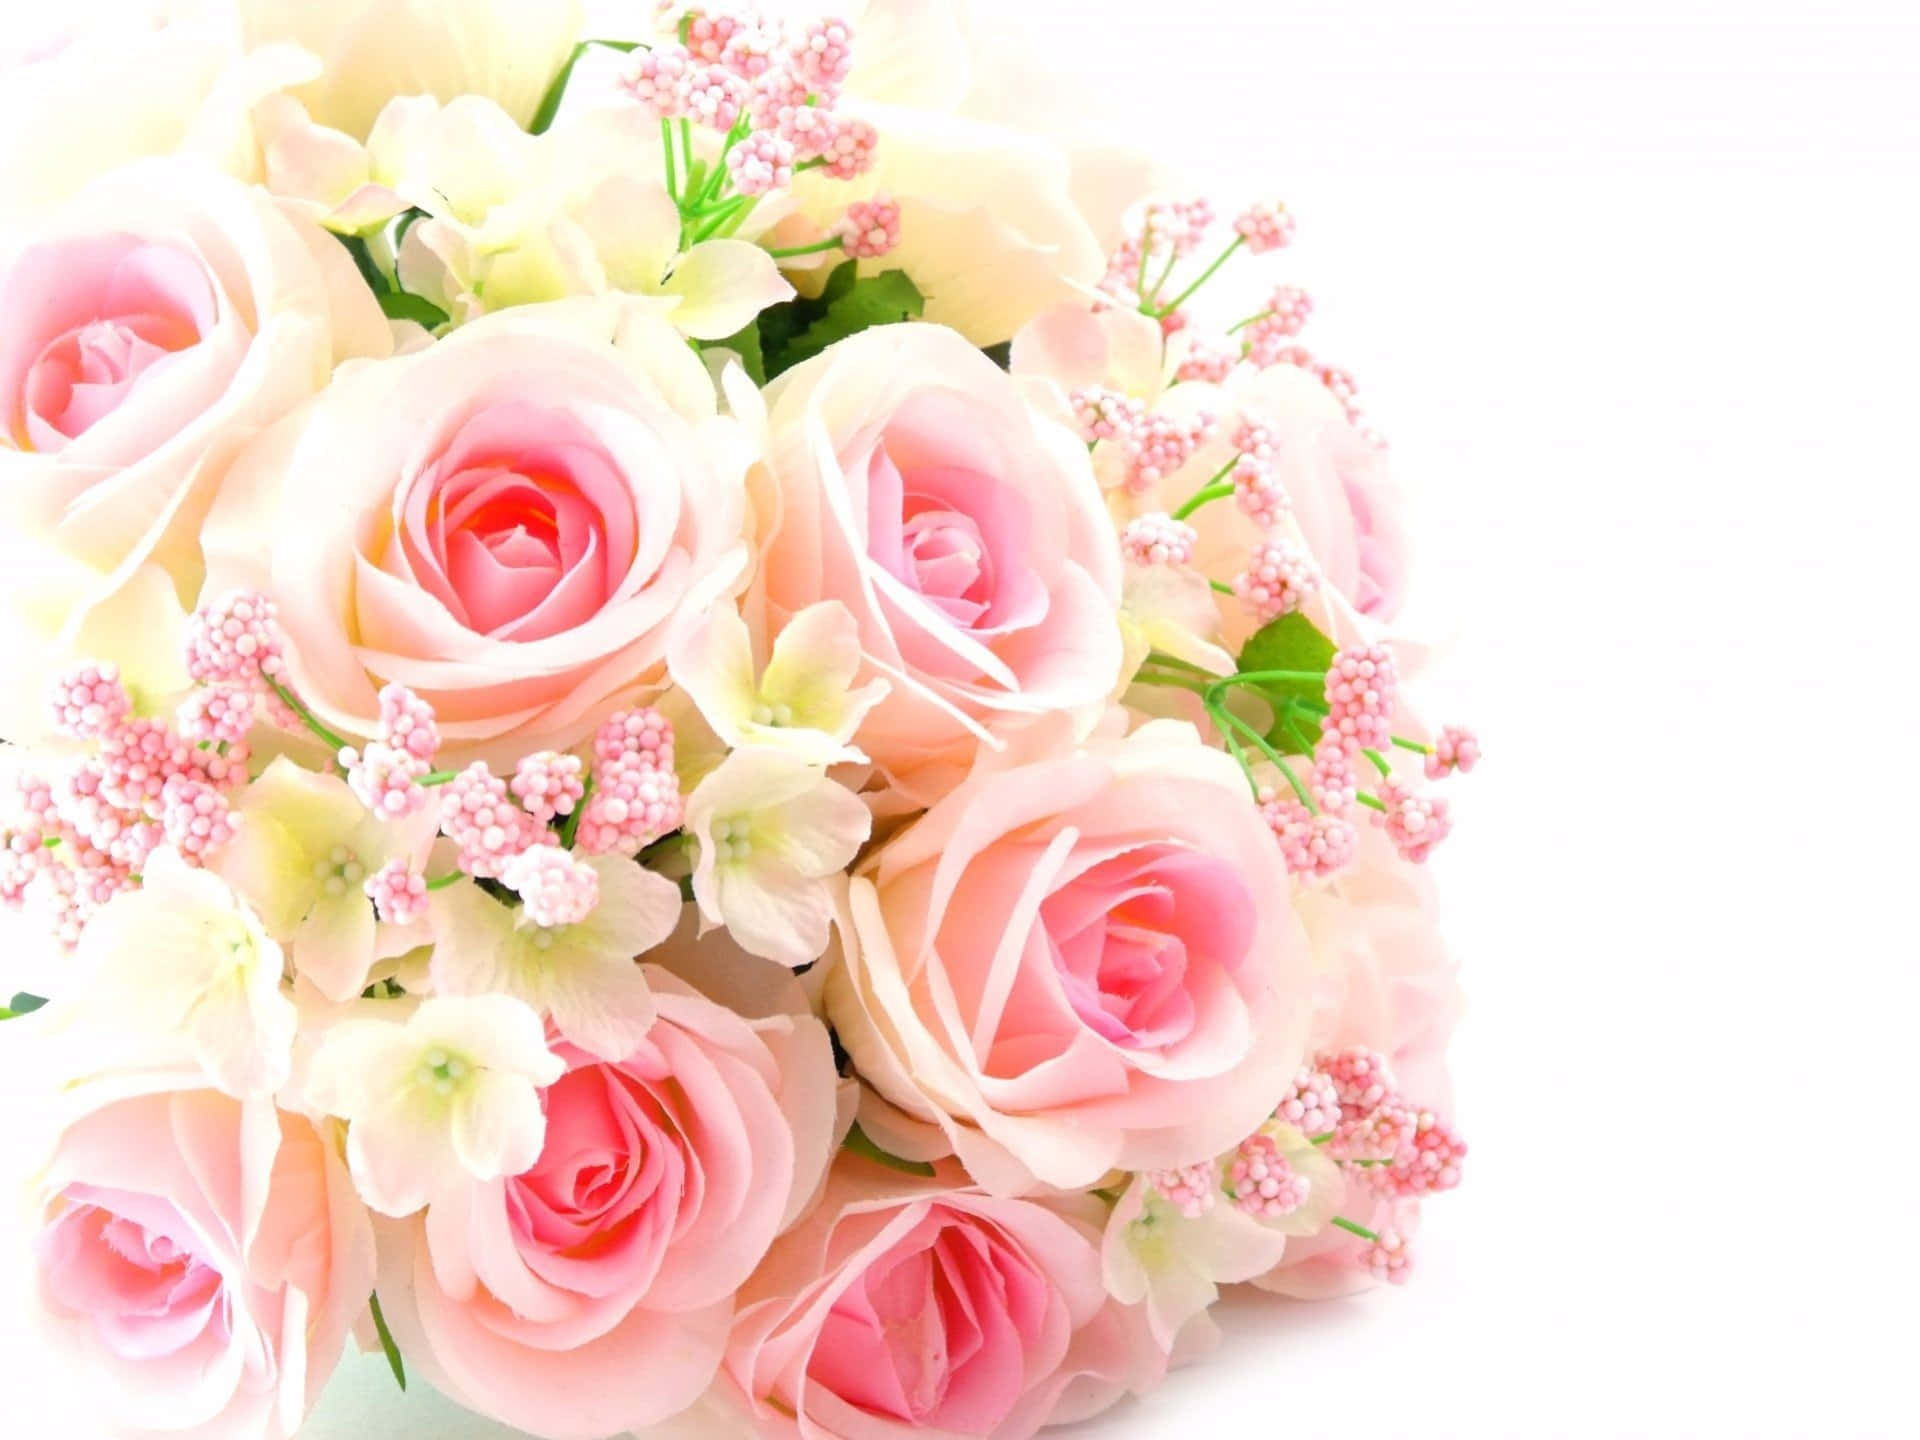 Round Rose Bouquet Aesthetic Pictures